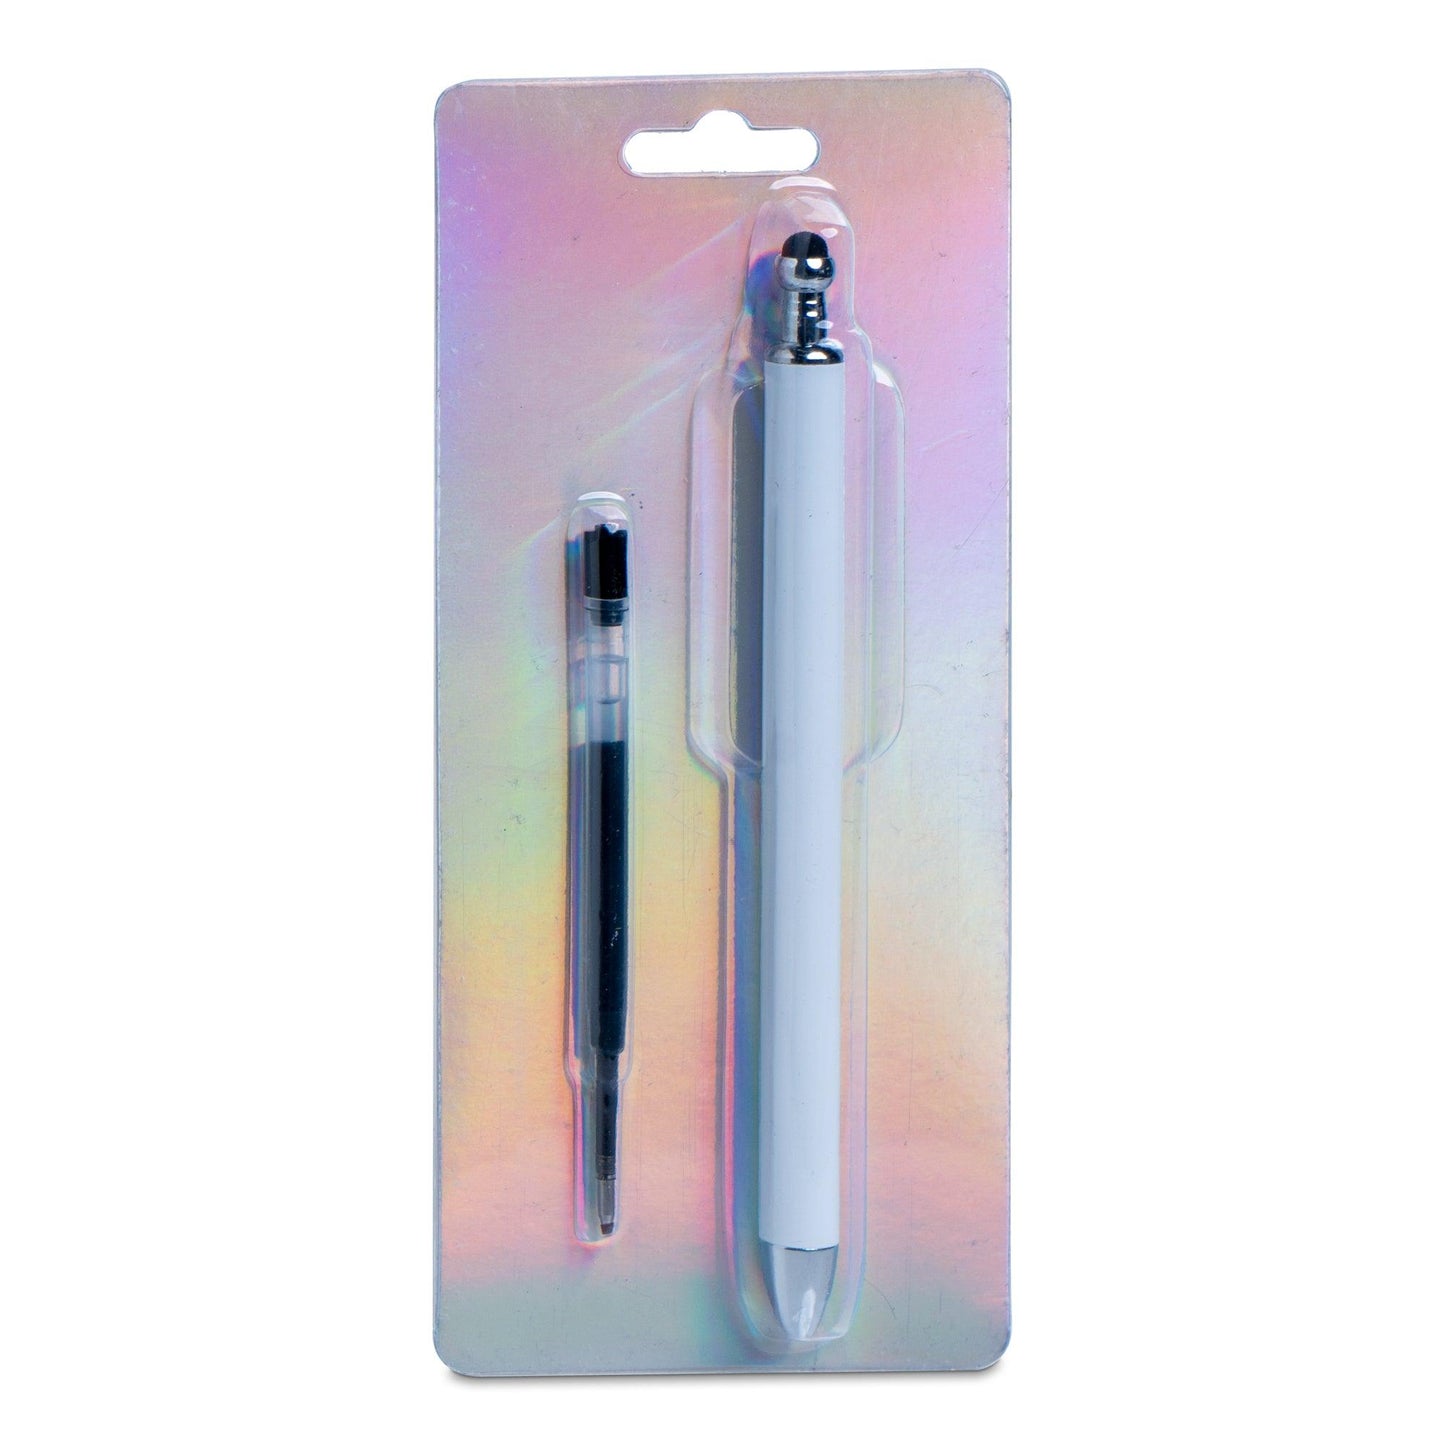 The Crafters Gel Pen